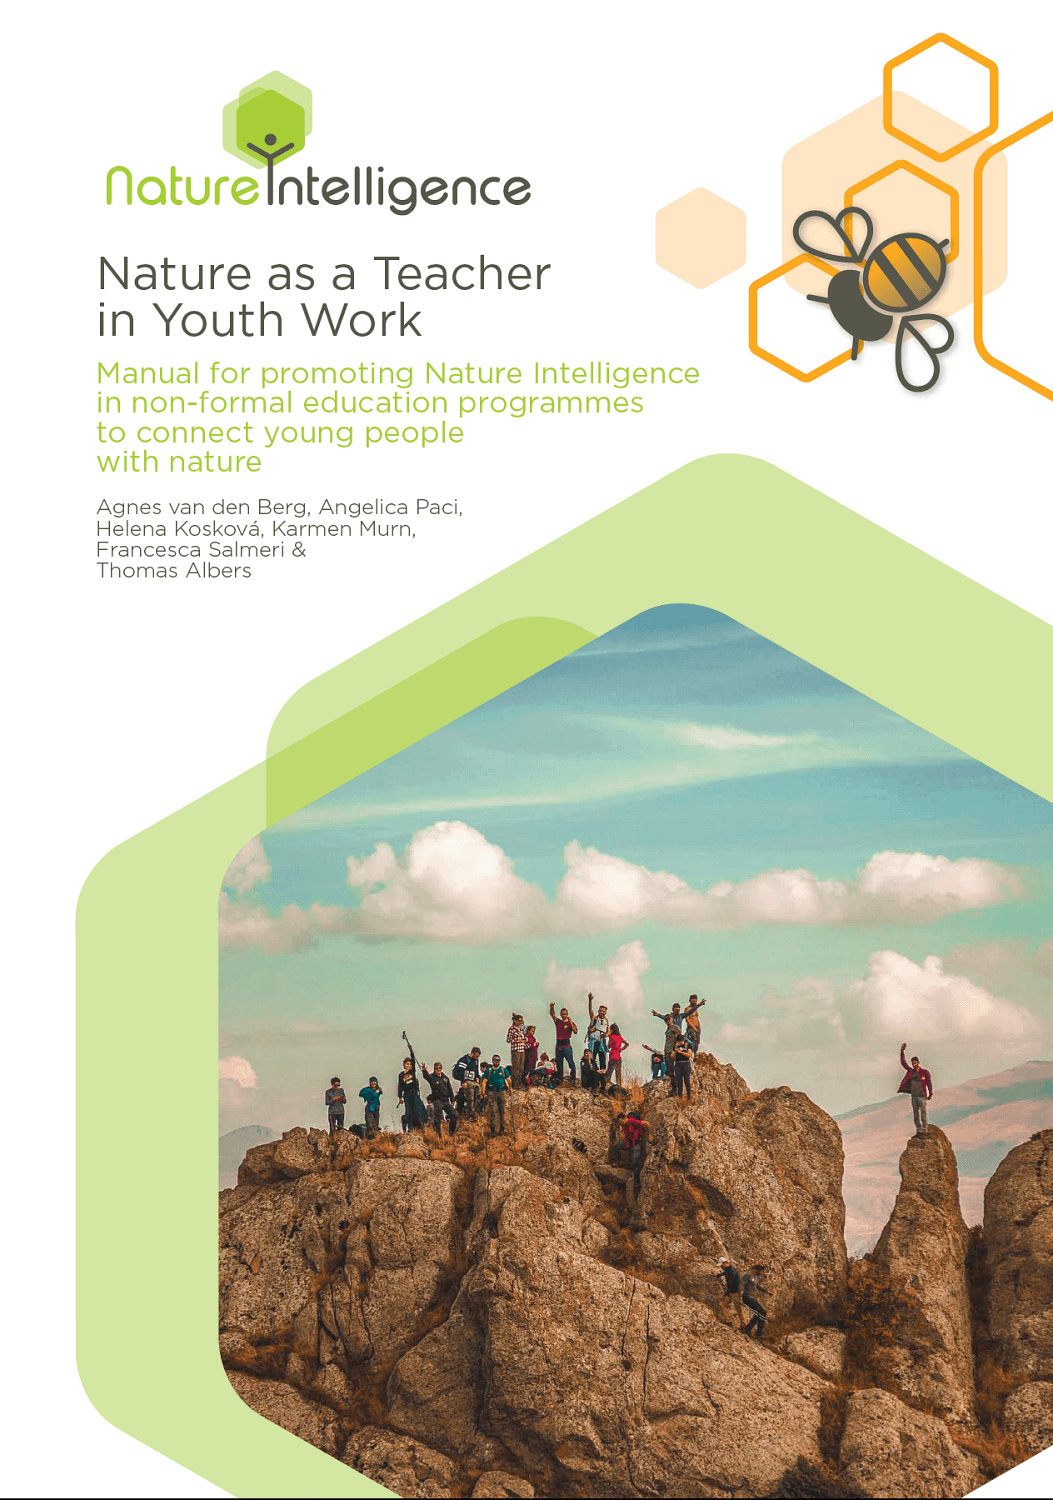 Nature as a teacher in youth work